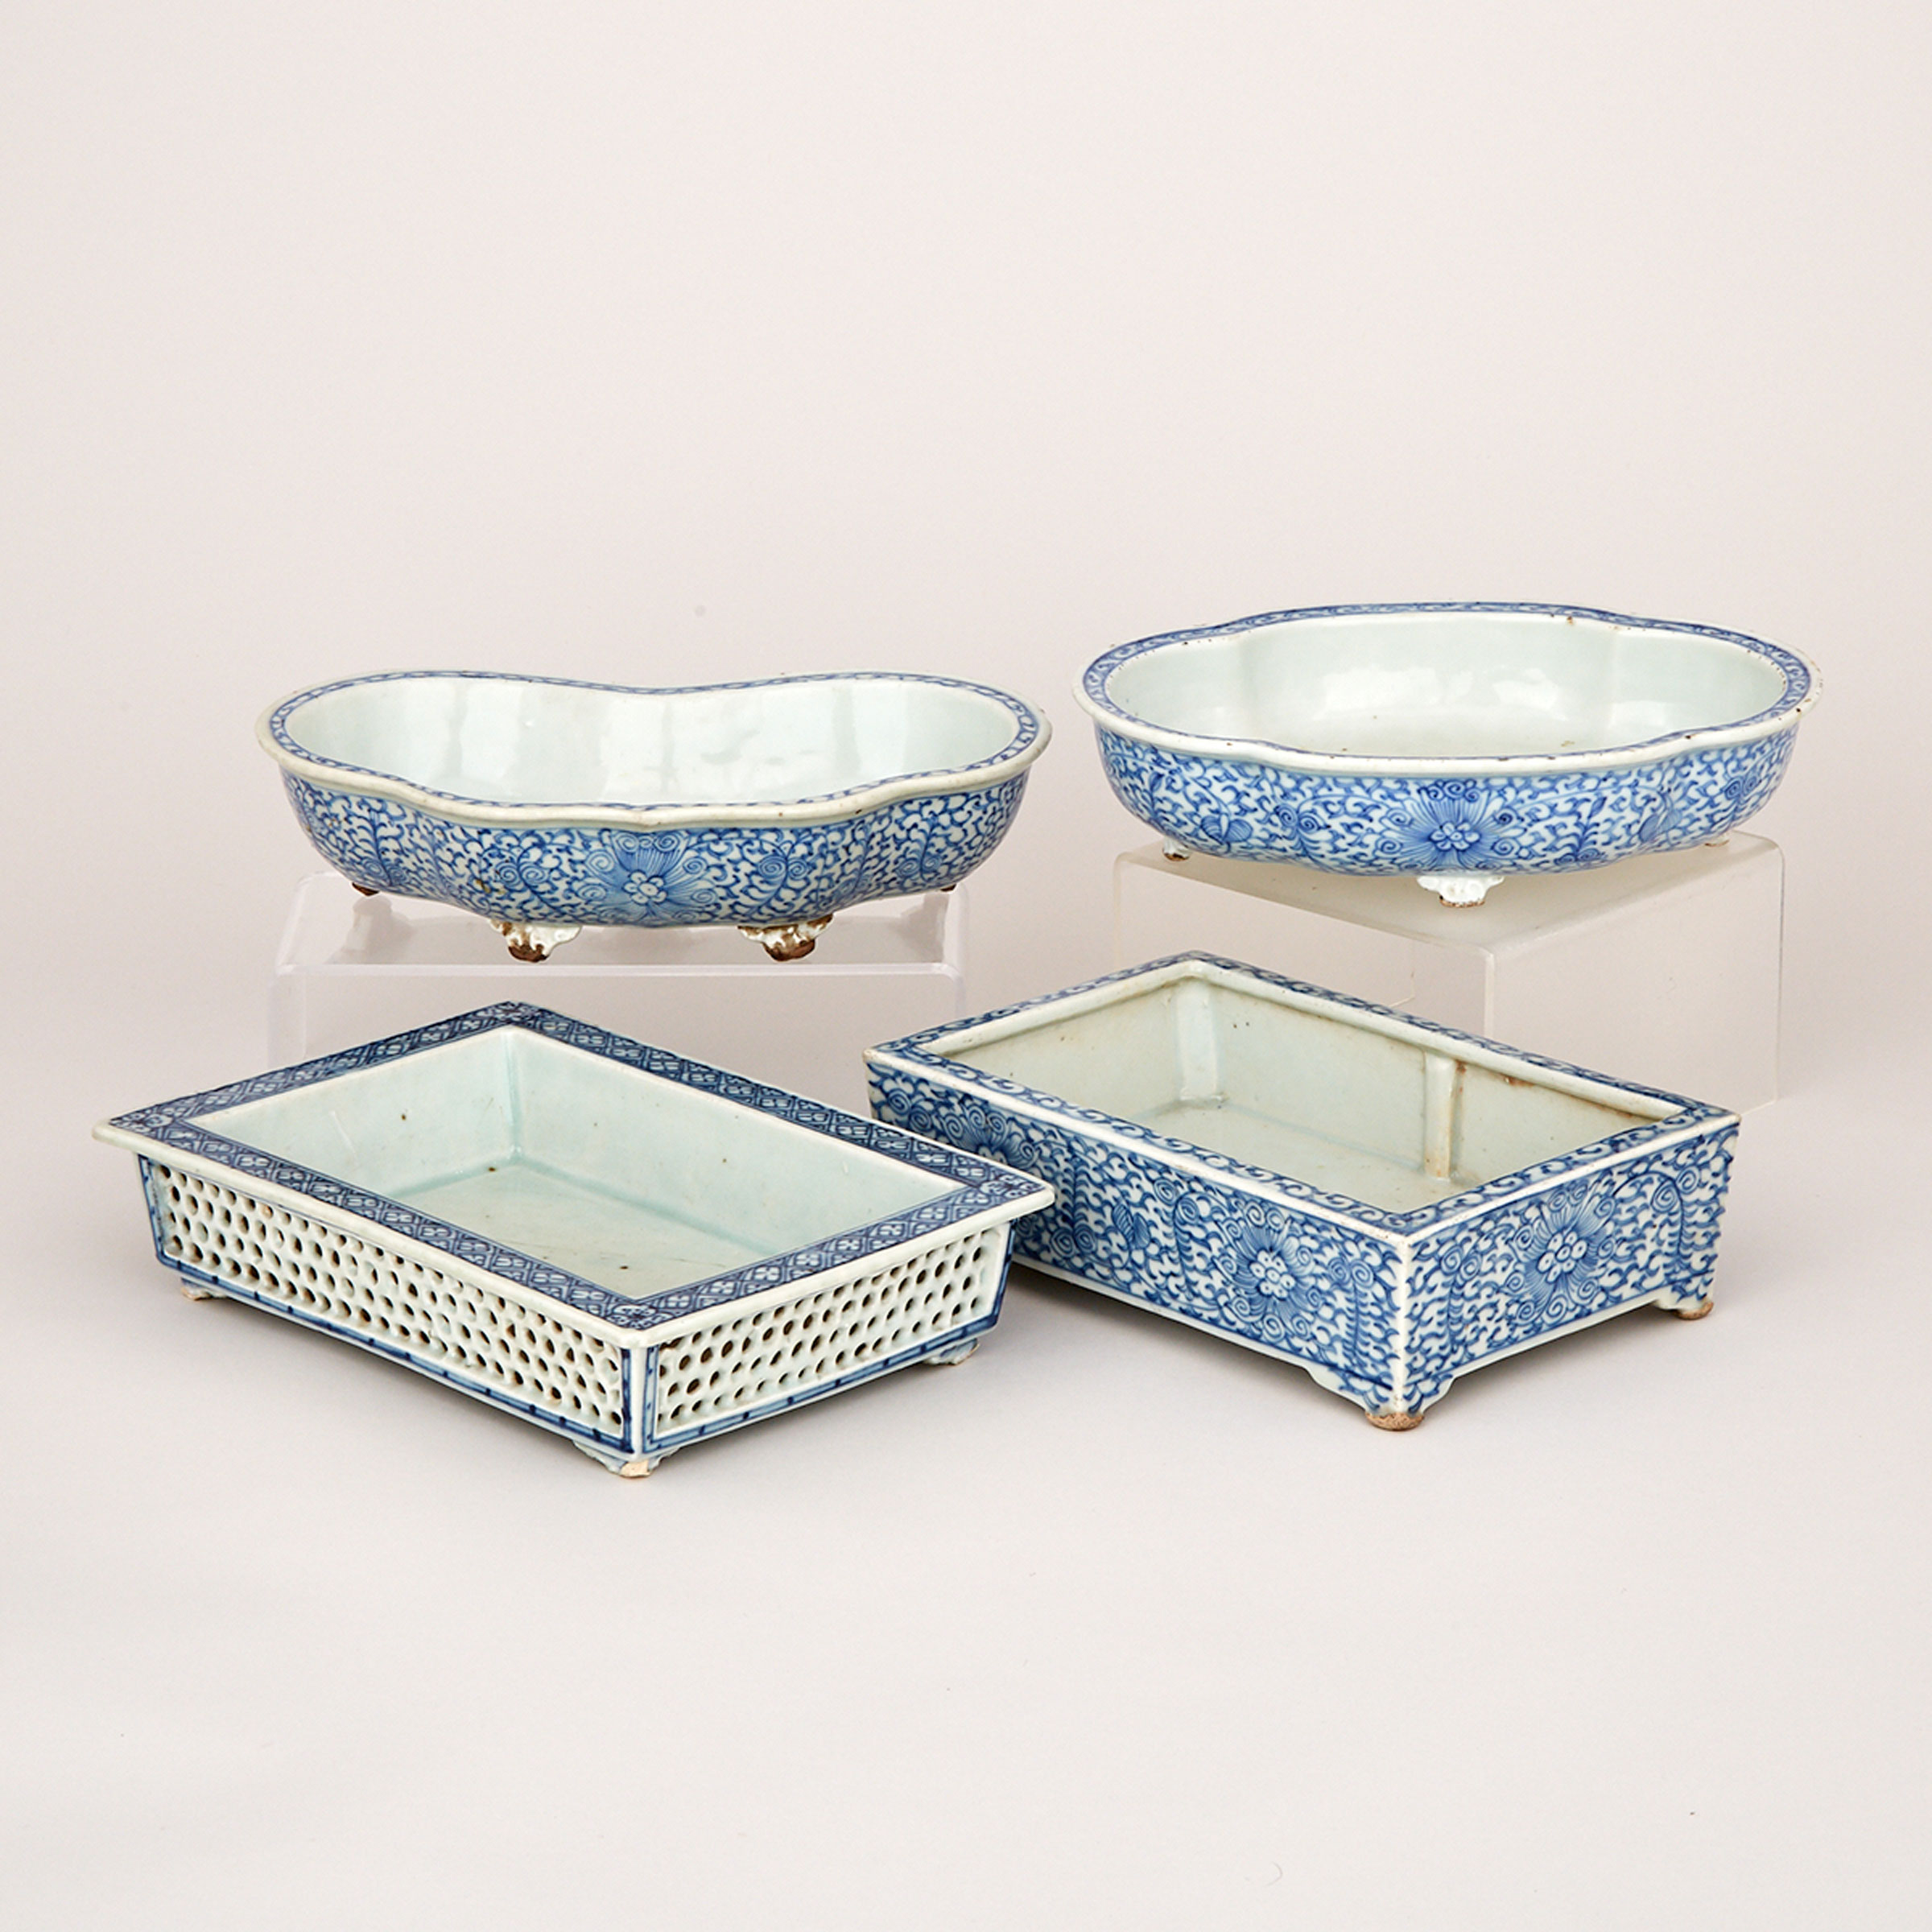 A Group of Four Blue and White Daffodil Basins, 19th Century